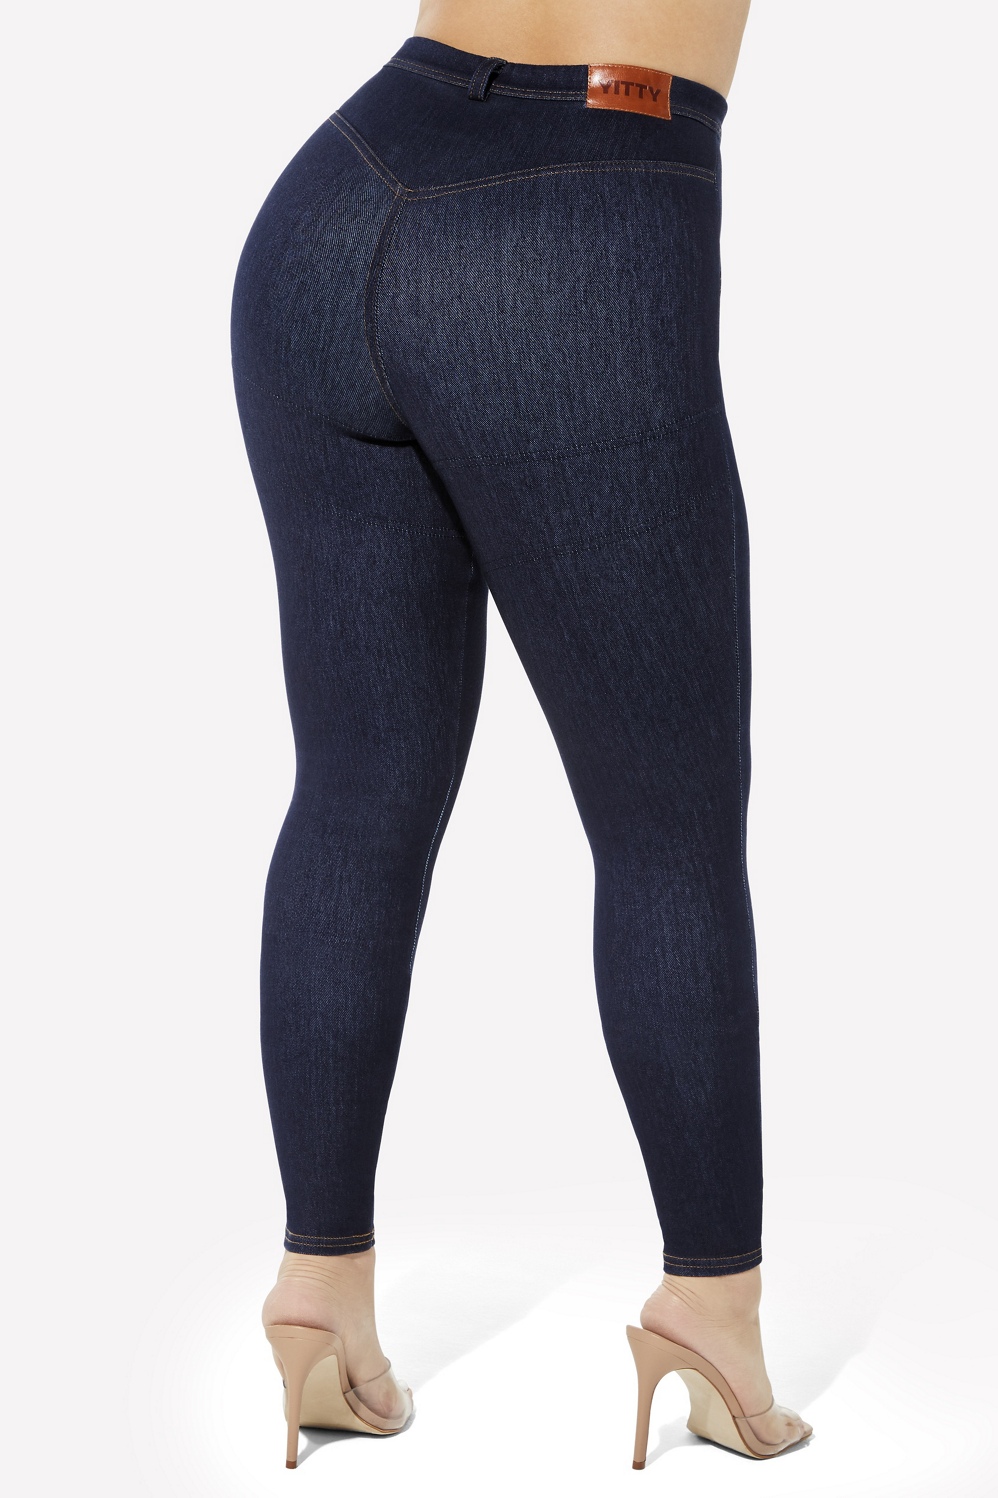 Stretch Smoothing Yitty Is - Jean Denim Served